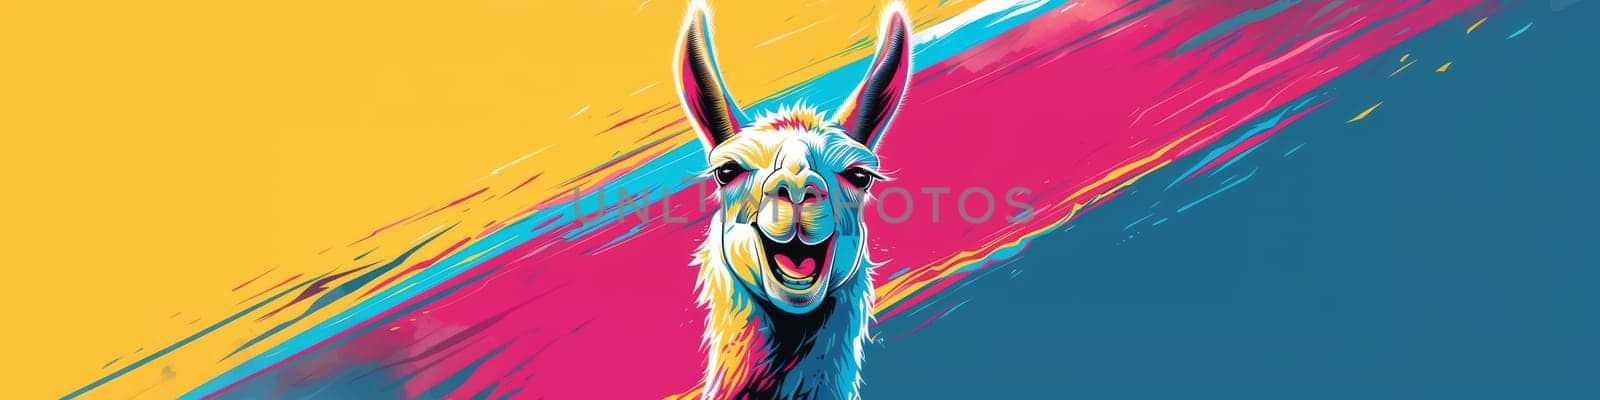 Laughing, happy lama on the colorful background by Kadula